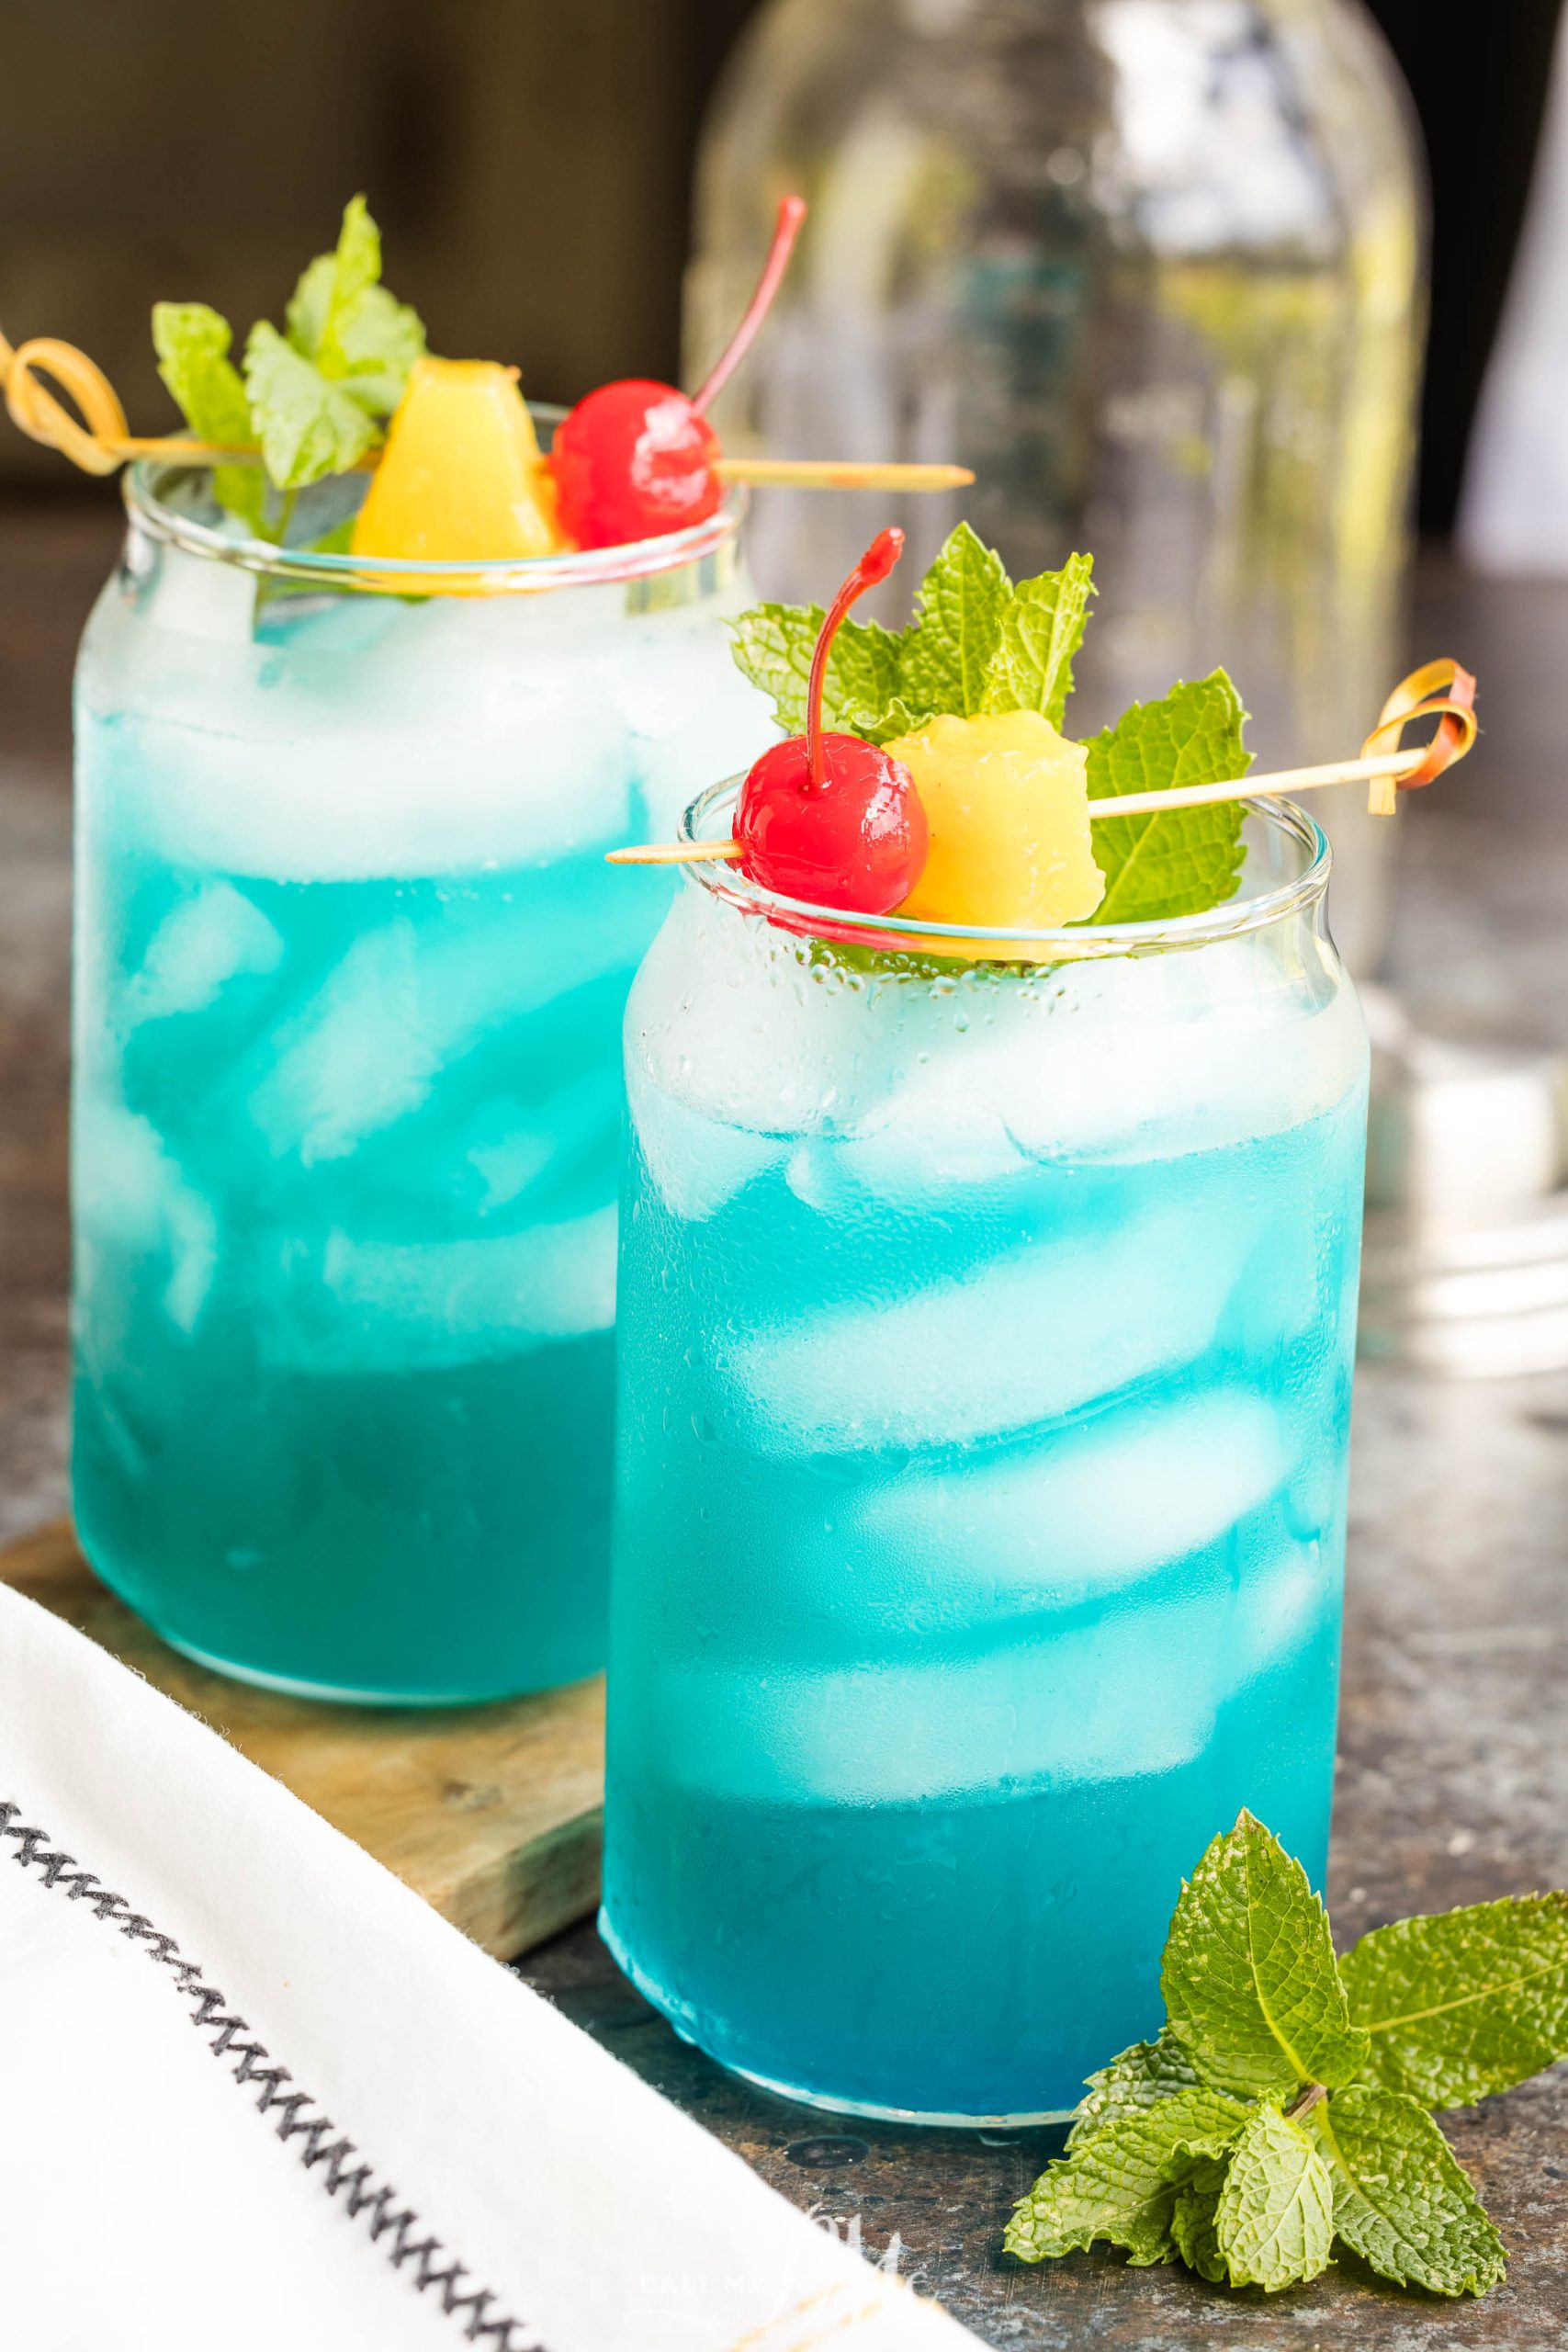 Two glasses of Blue Hawaiian Cocktail with ice, garnished with cherries, pineapple chunks, and mint leaves, are placed on a table with a white napkin nearby.